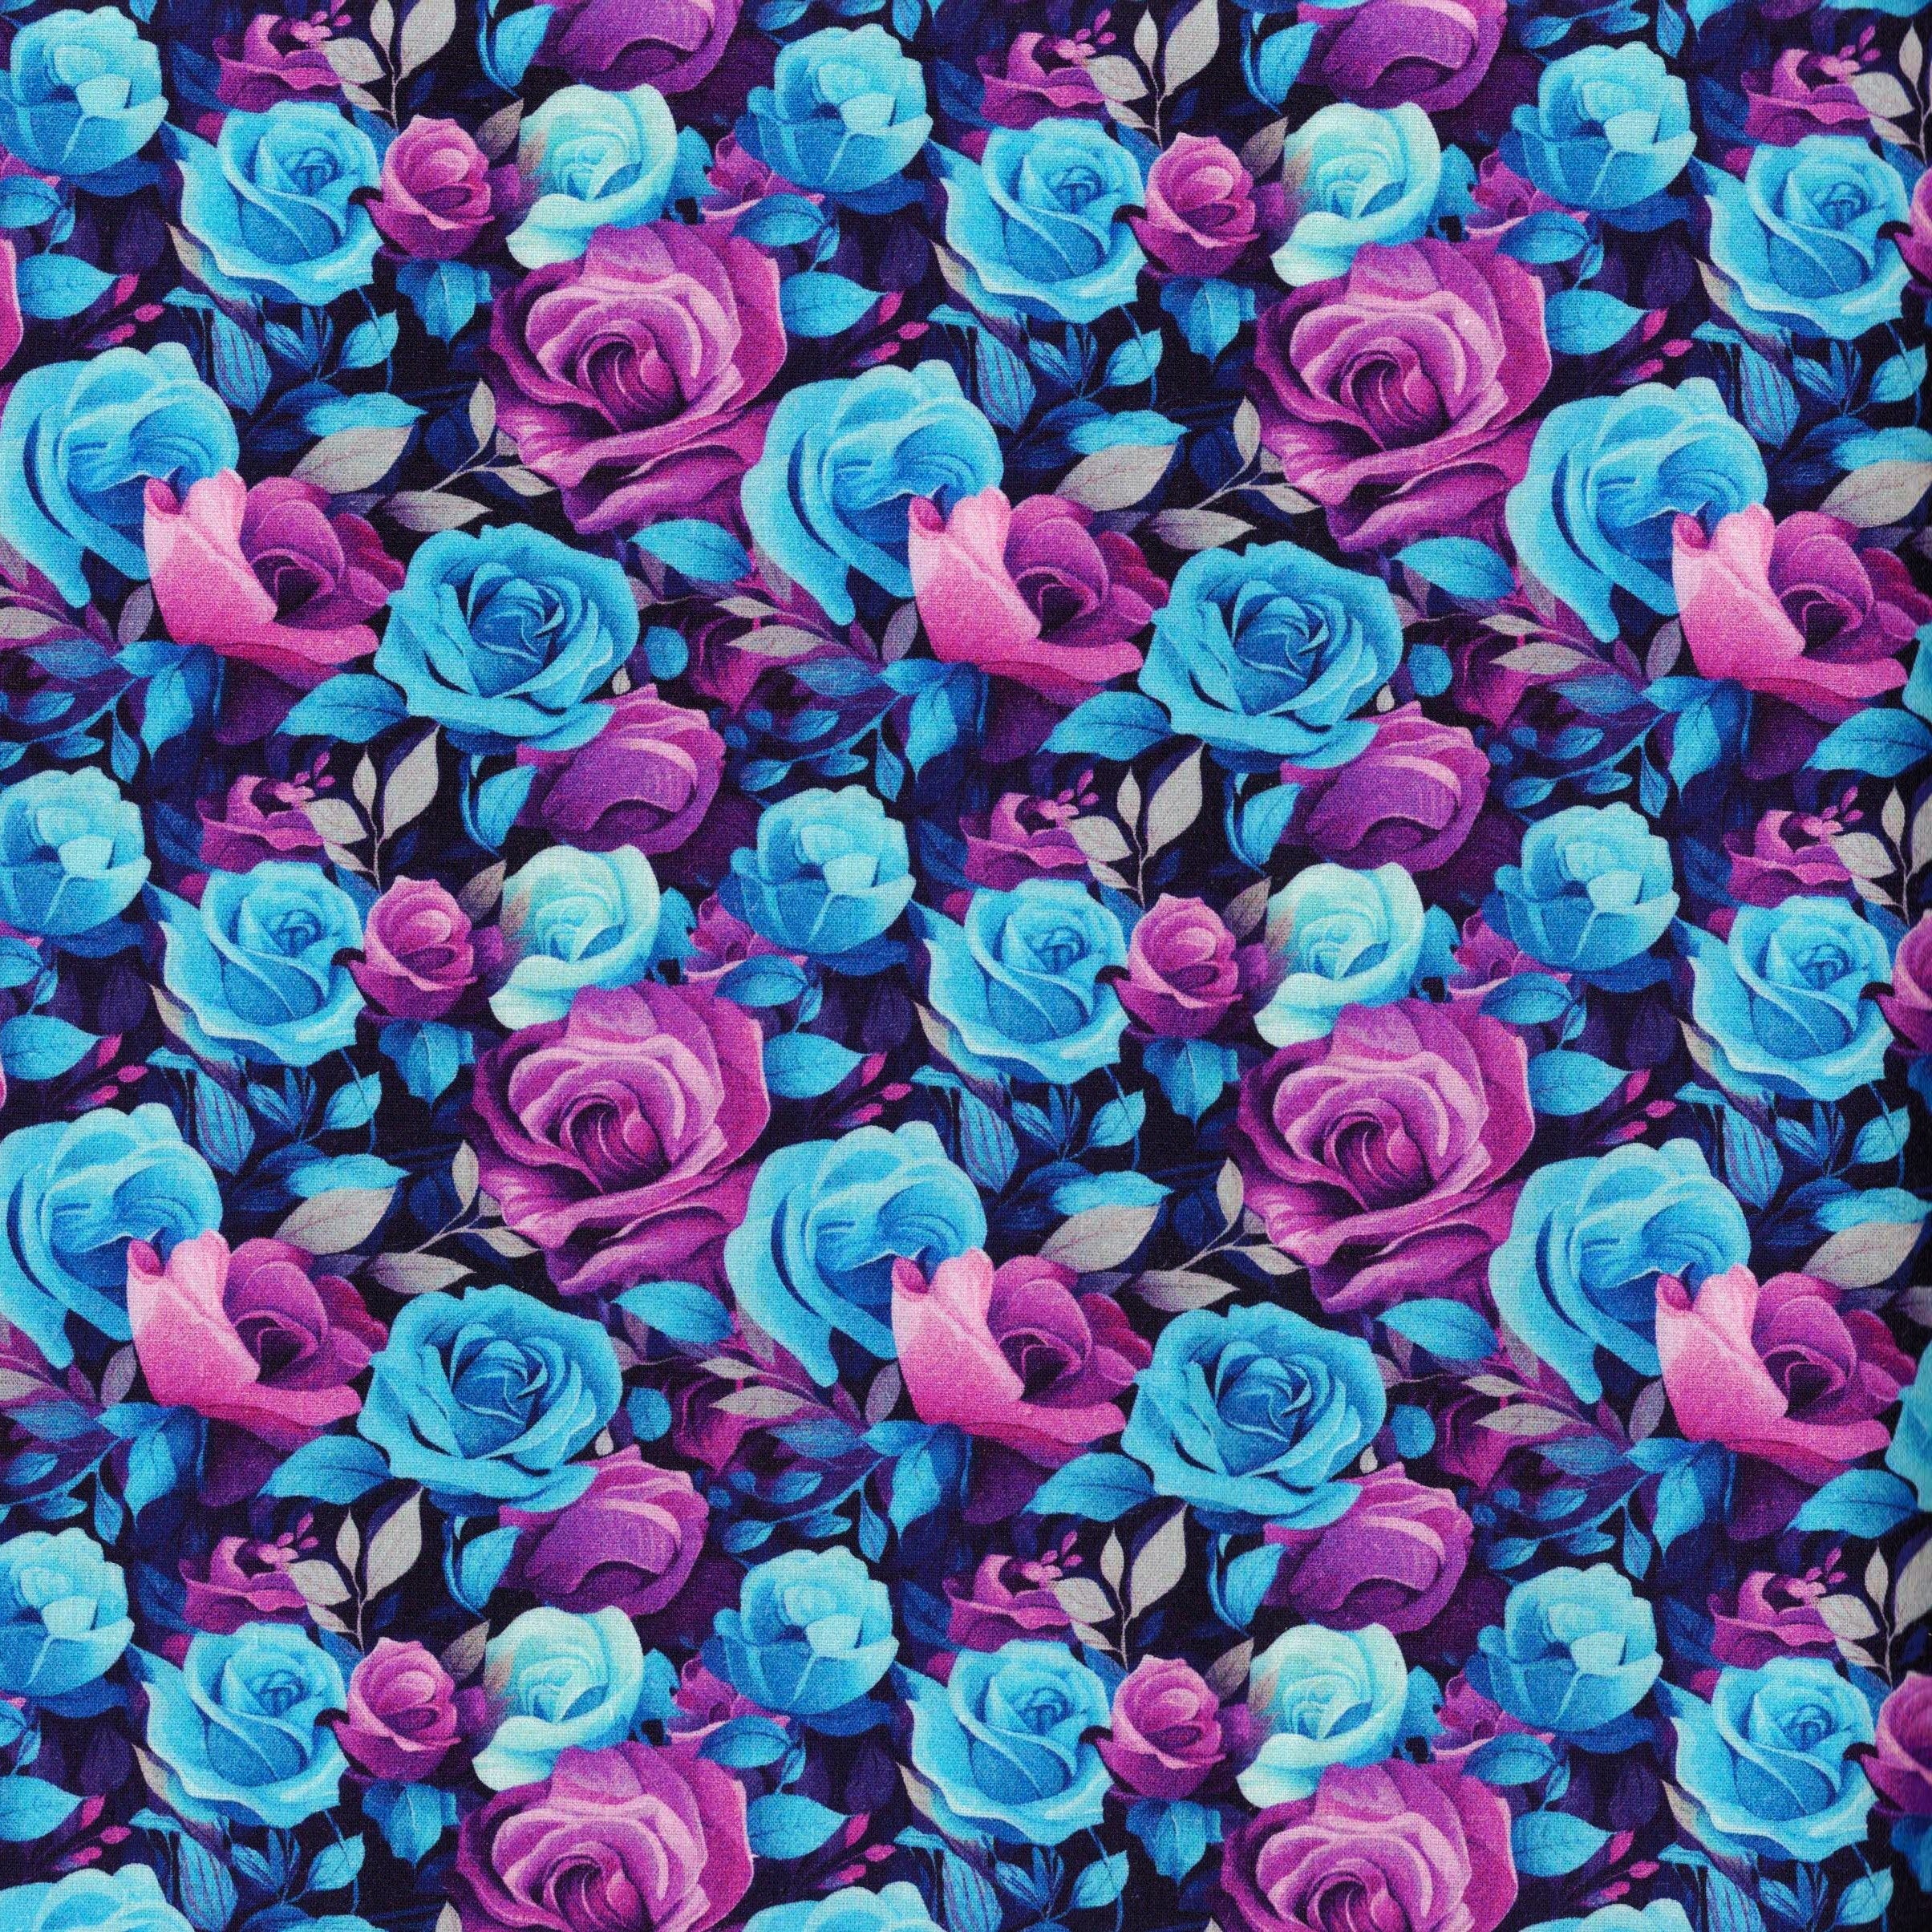 PRE-ORDER Quirky Cotton Flowers Packed Roses Floral Nature Purple Teal (PRE-ORDER QC Purple & Teal Roses )